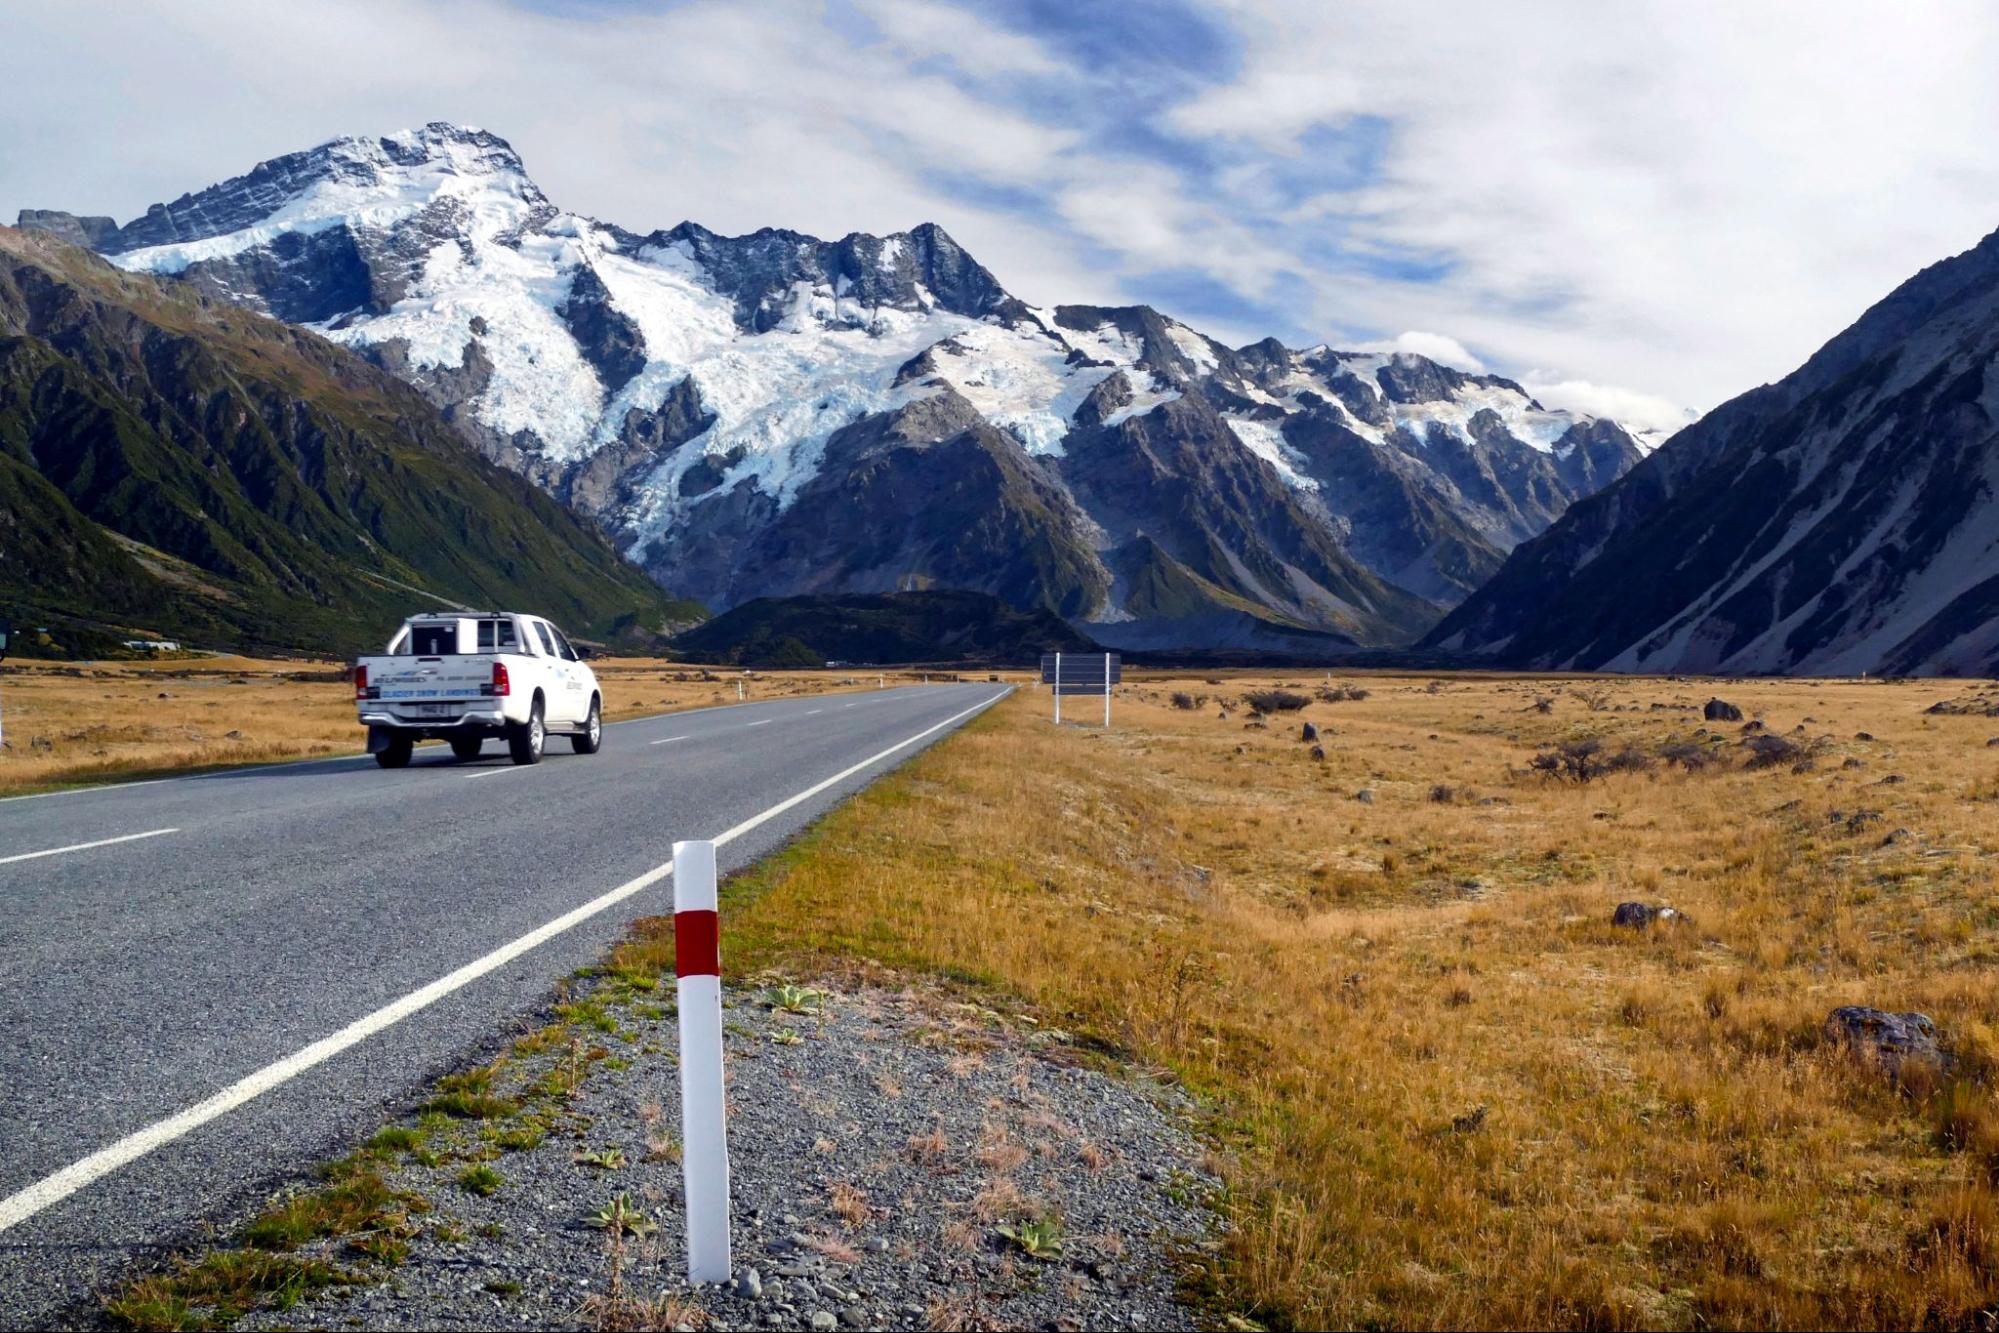 New Zealand to Help Pay for Cleaner Cars to Reduce Emissions